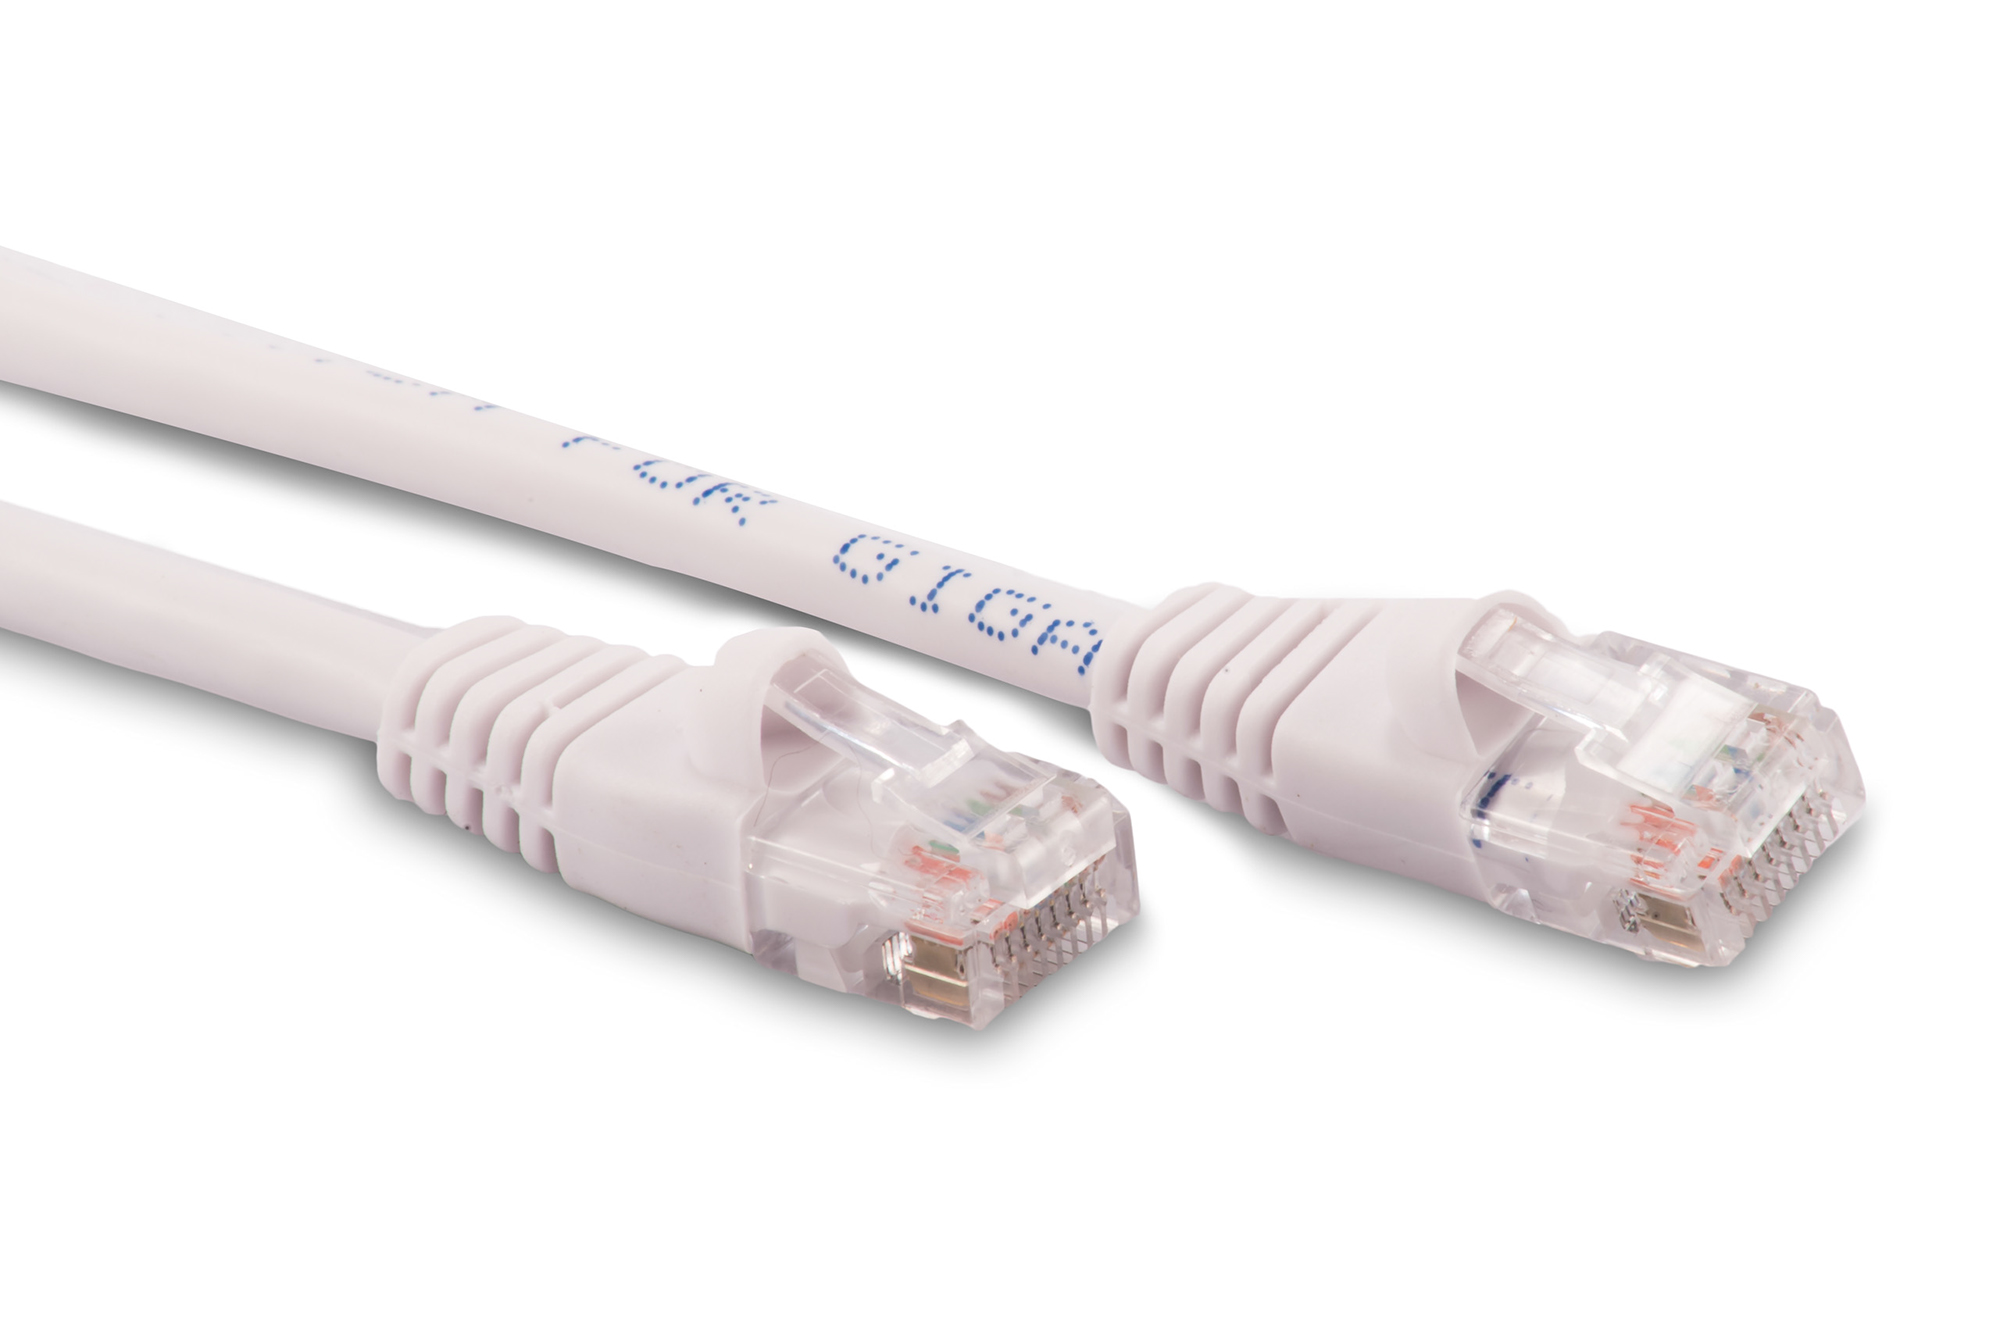 7ft Cat5e Ethernet Patch Cable - White Color - Snagless Boot